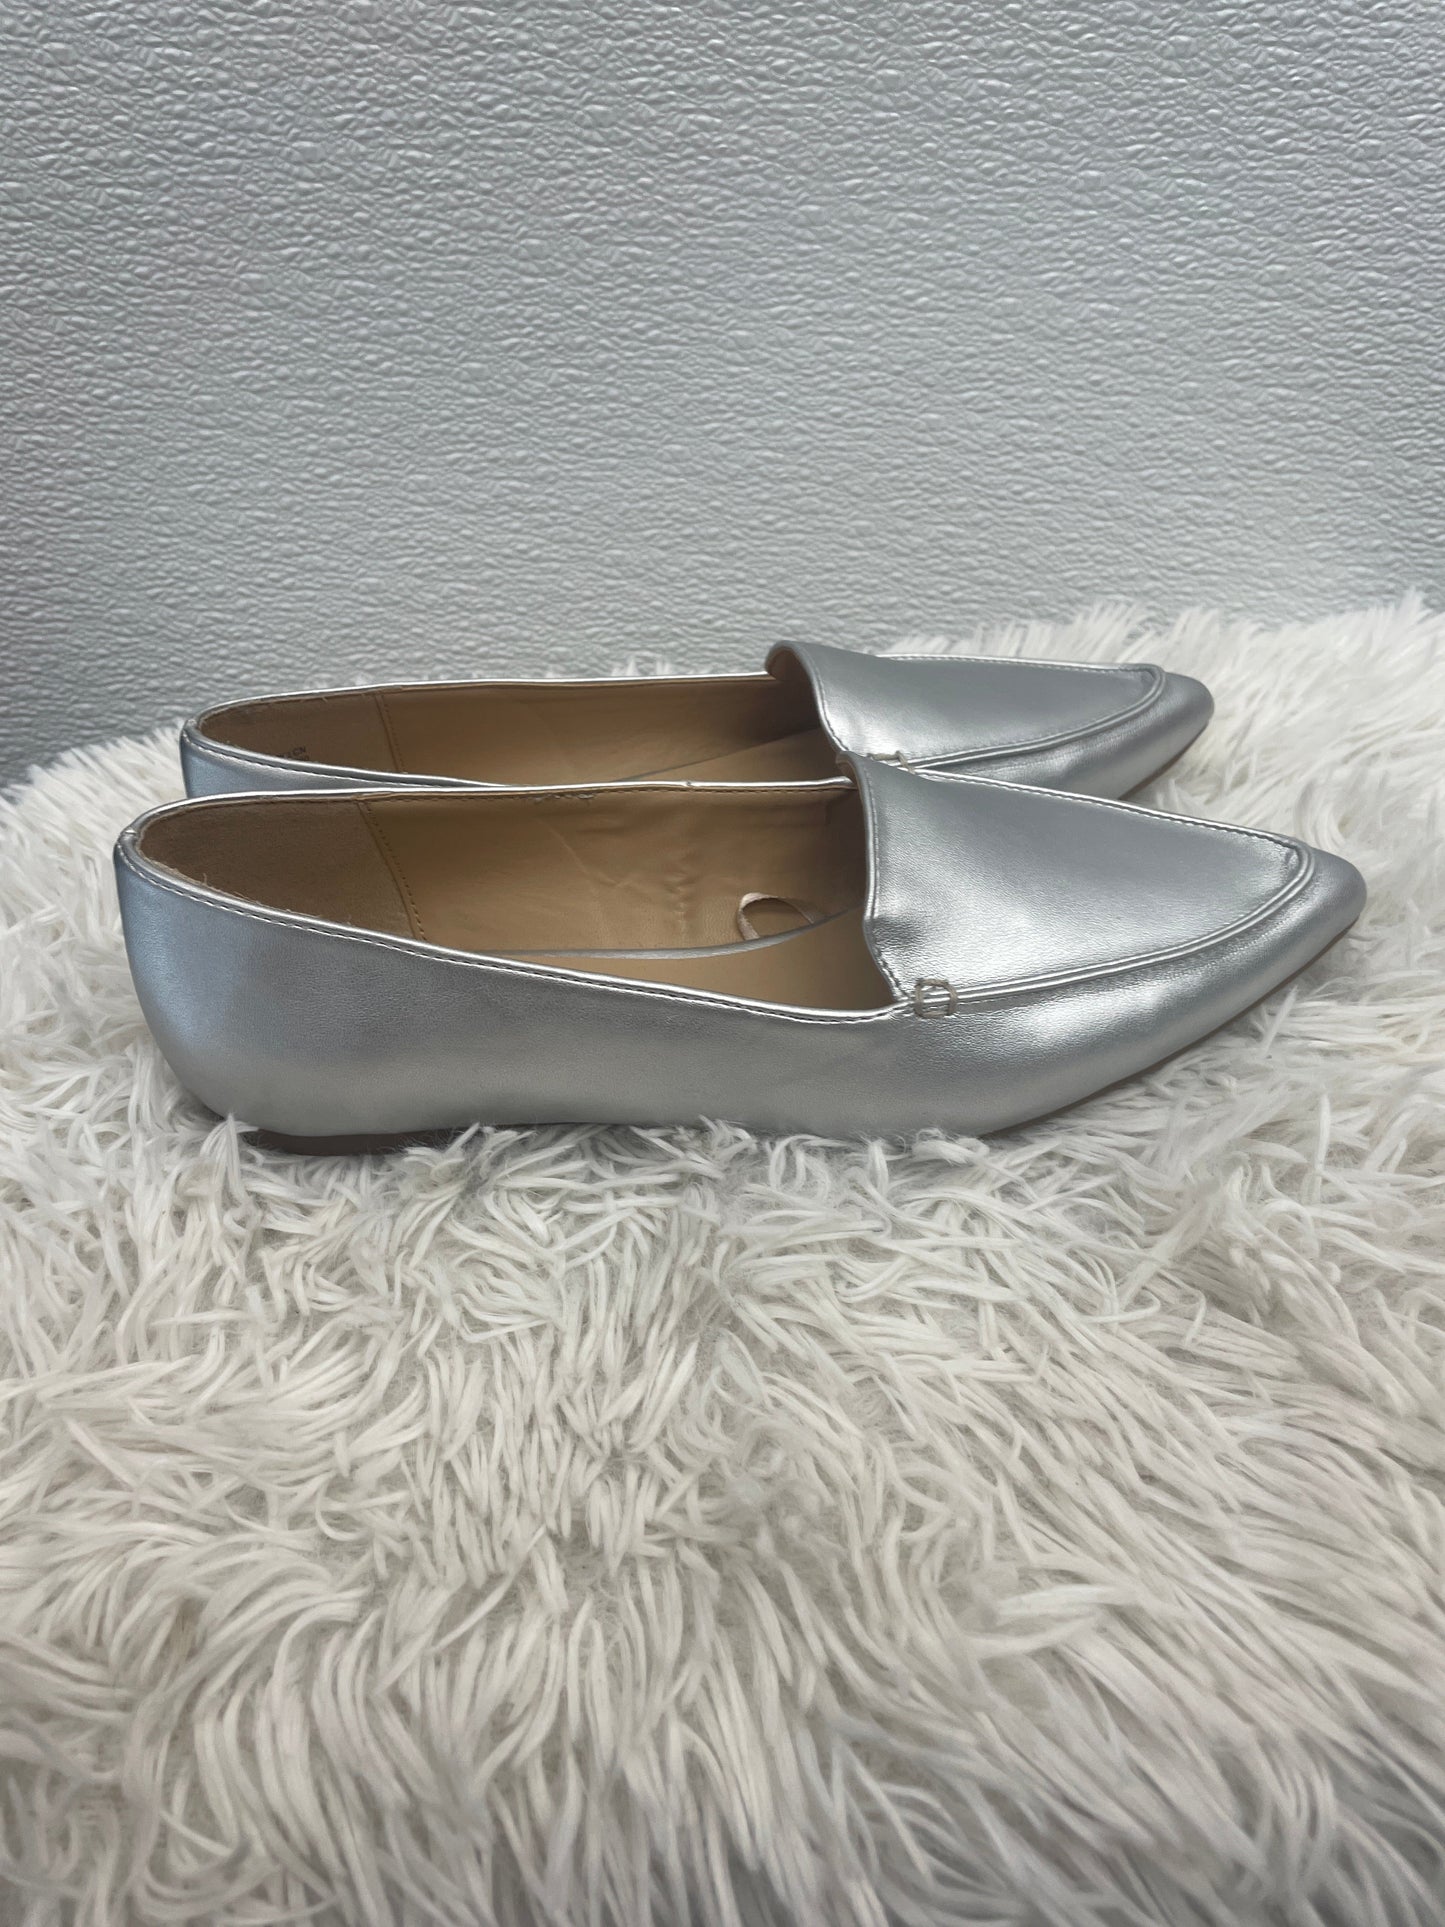 Shoes Flats Other By Gap  Size: 8